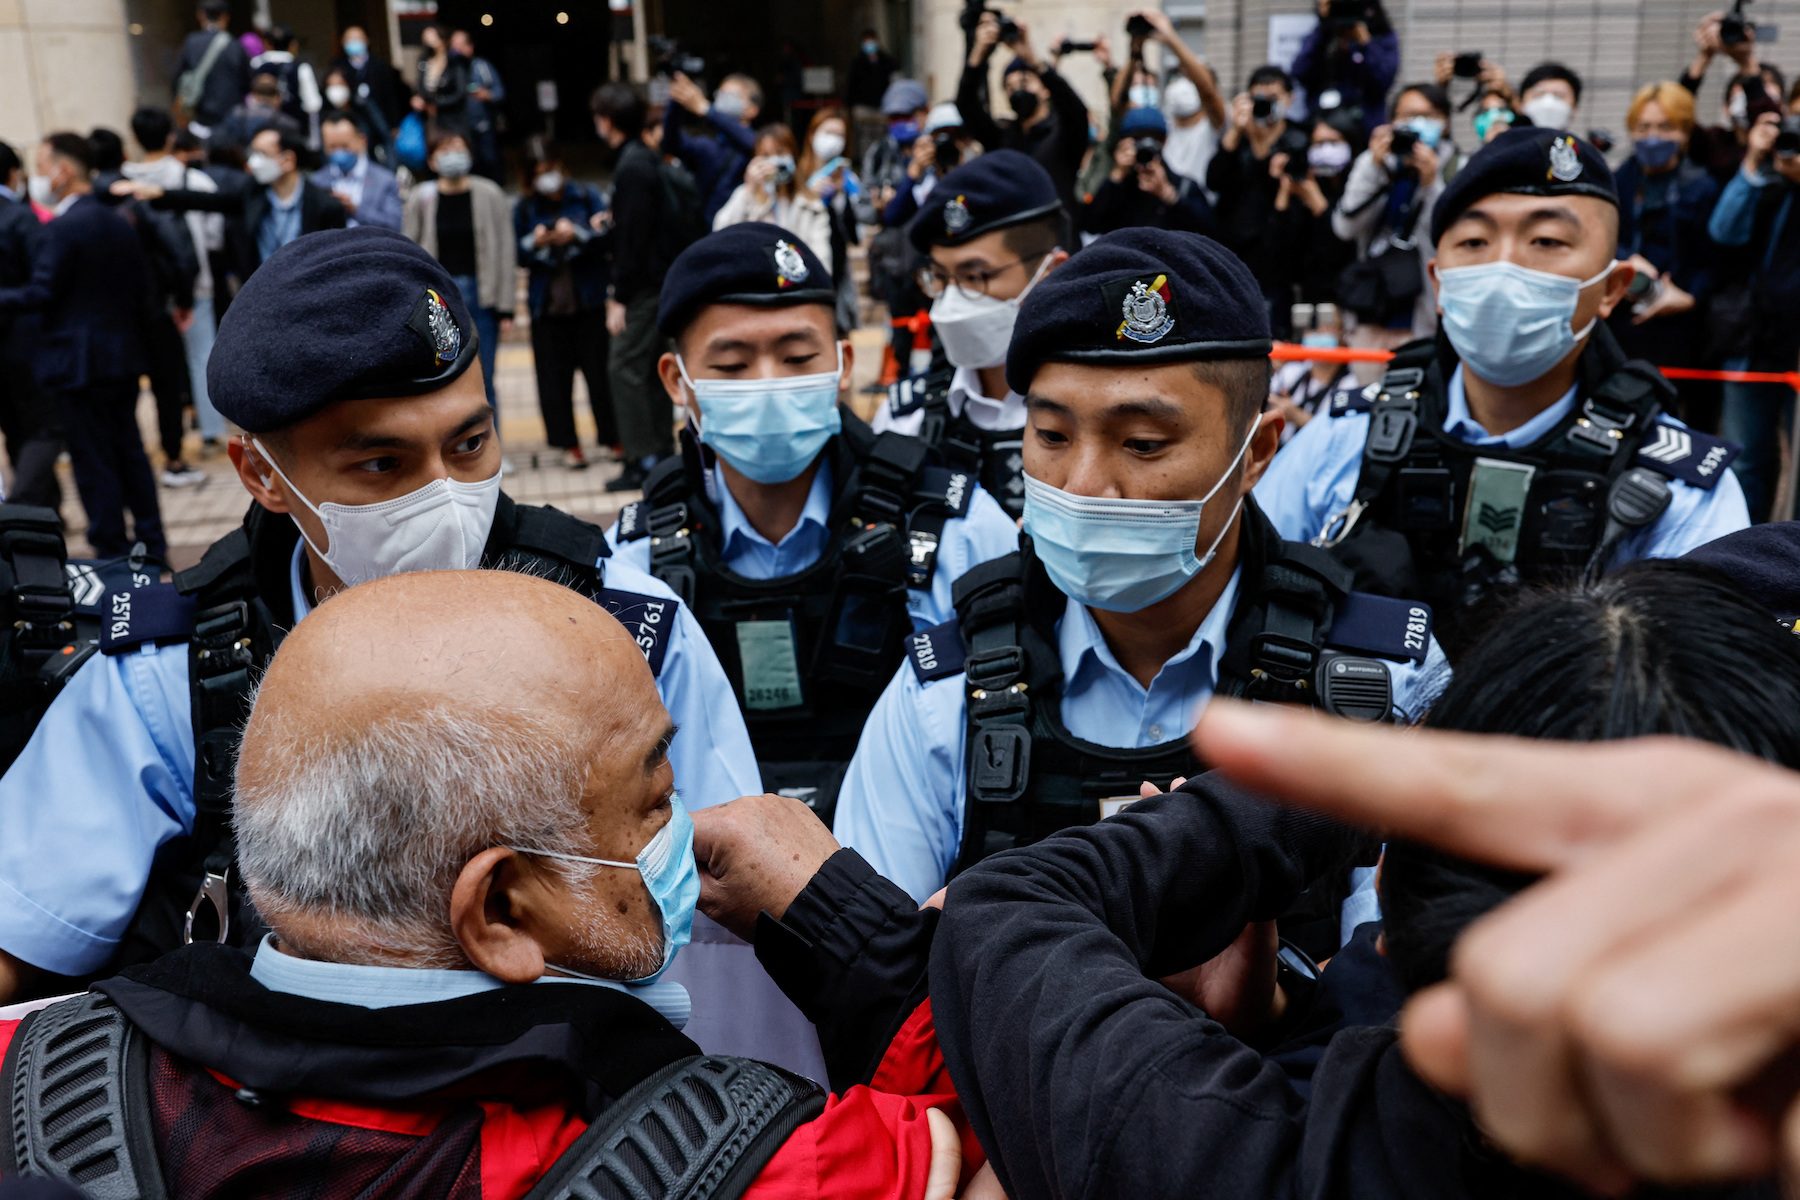 Landmark Hong Kong national security trial opens 2 years after arrests